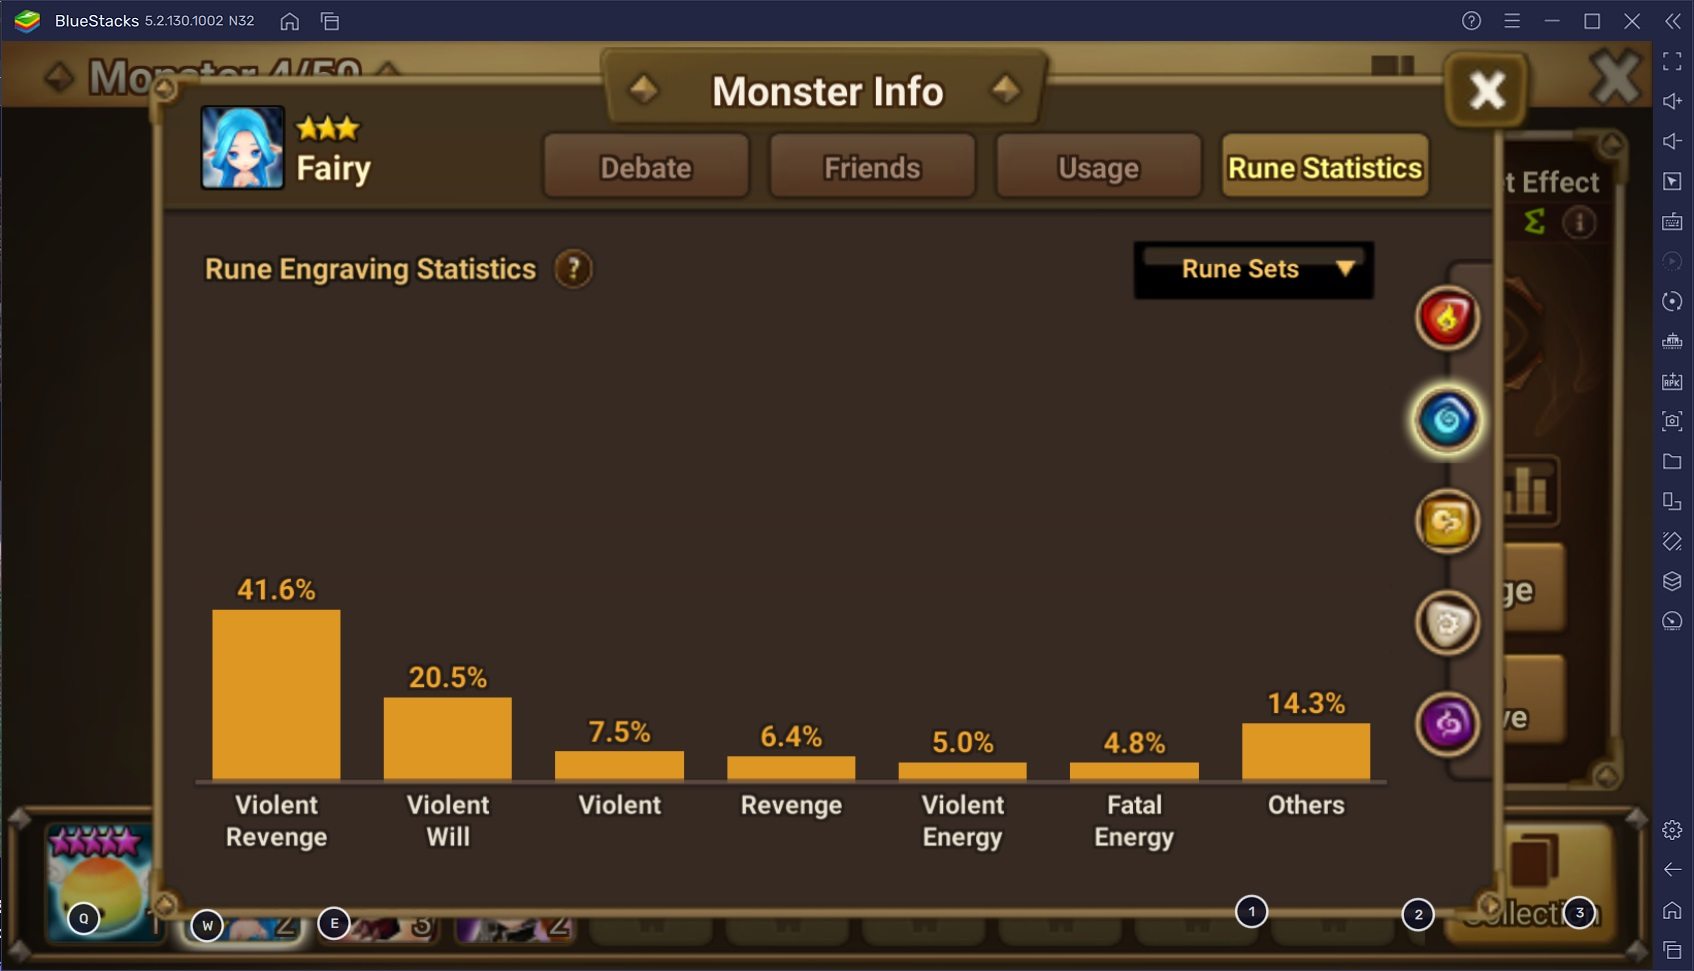 Summoners War Version 6.5.0 is Adding a New Feature to the Rune System